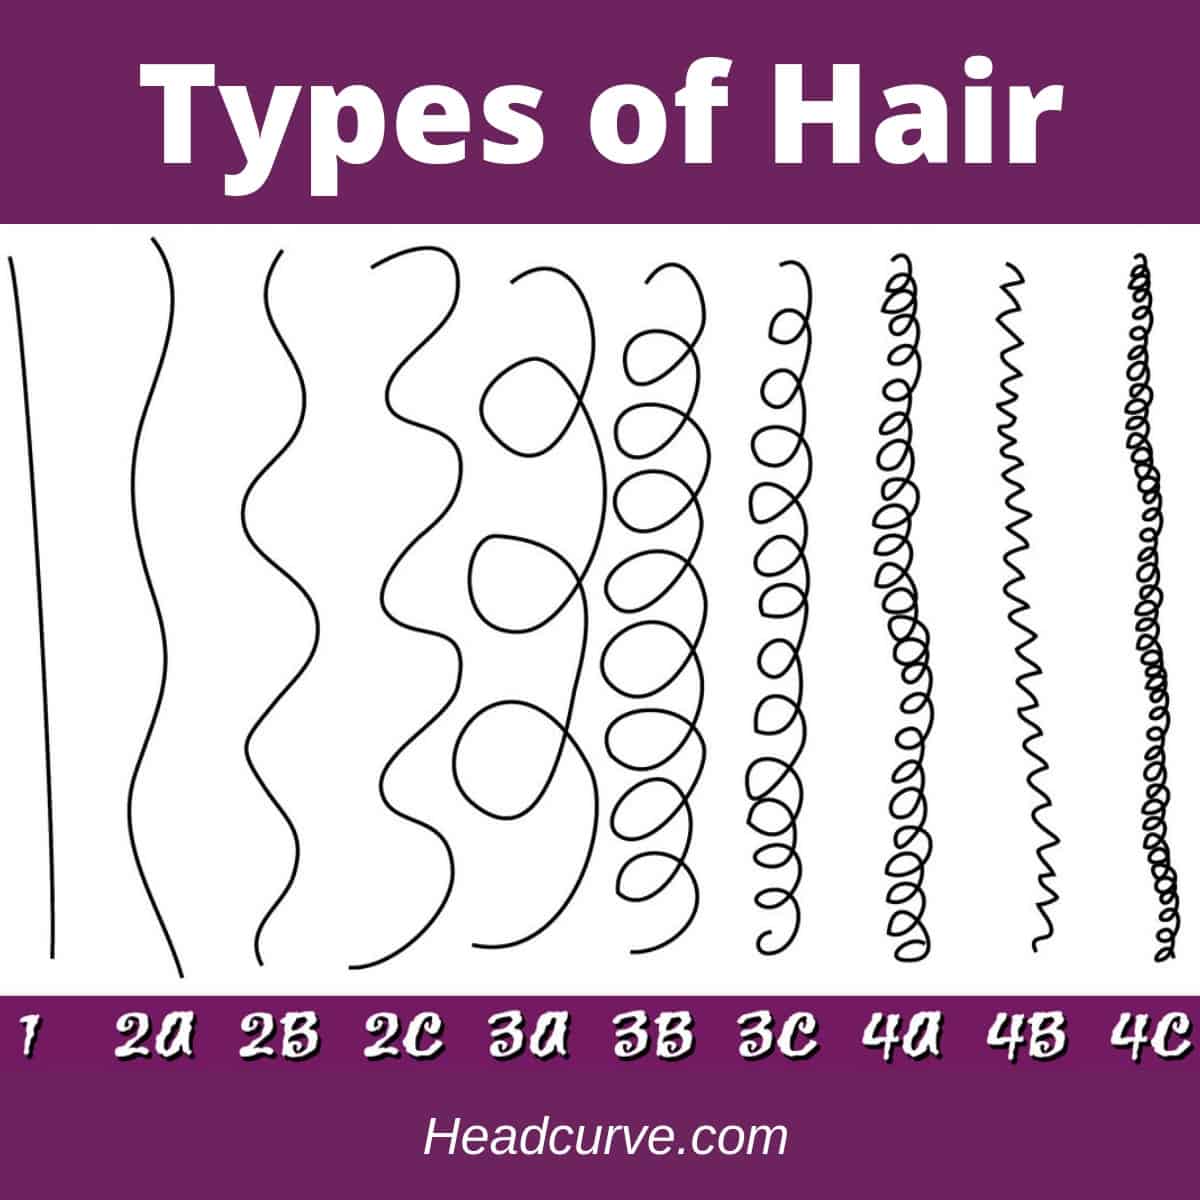 The different types of hair (chart).